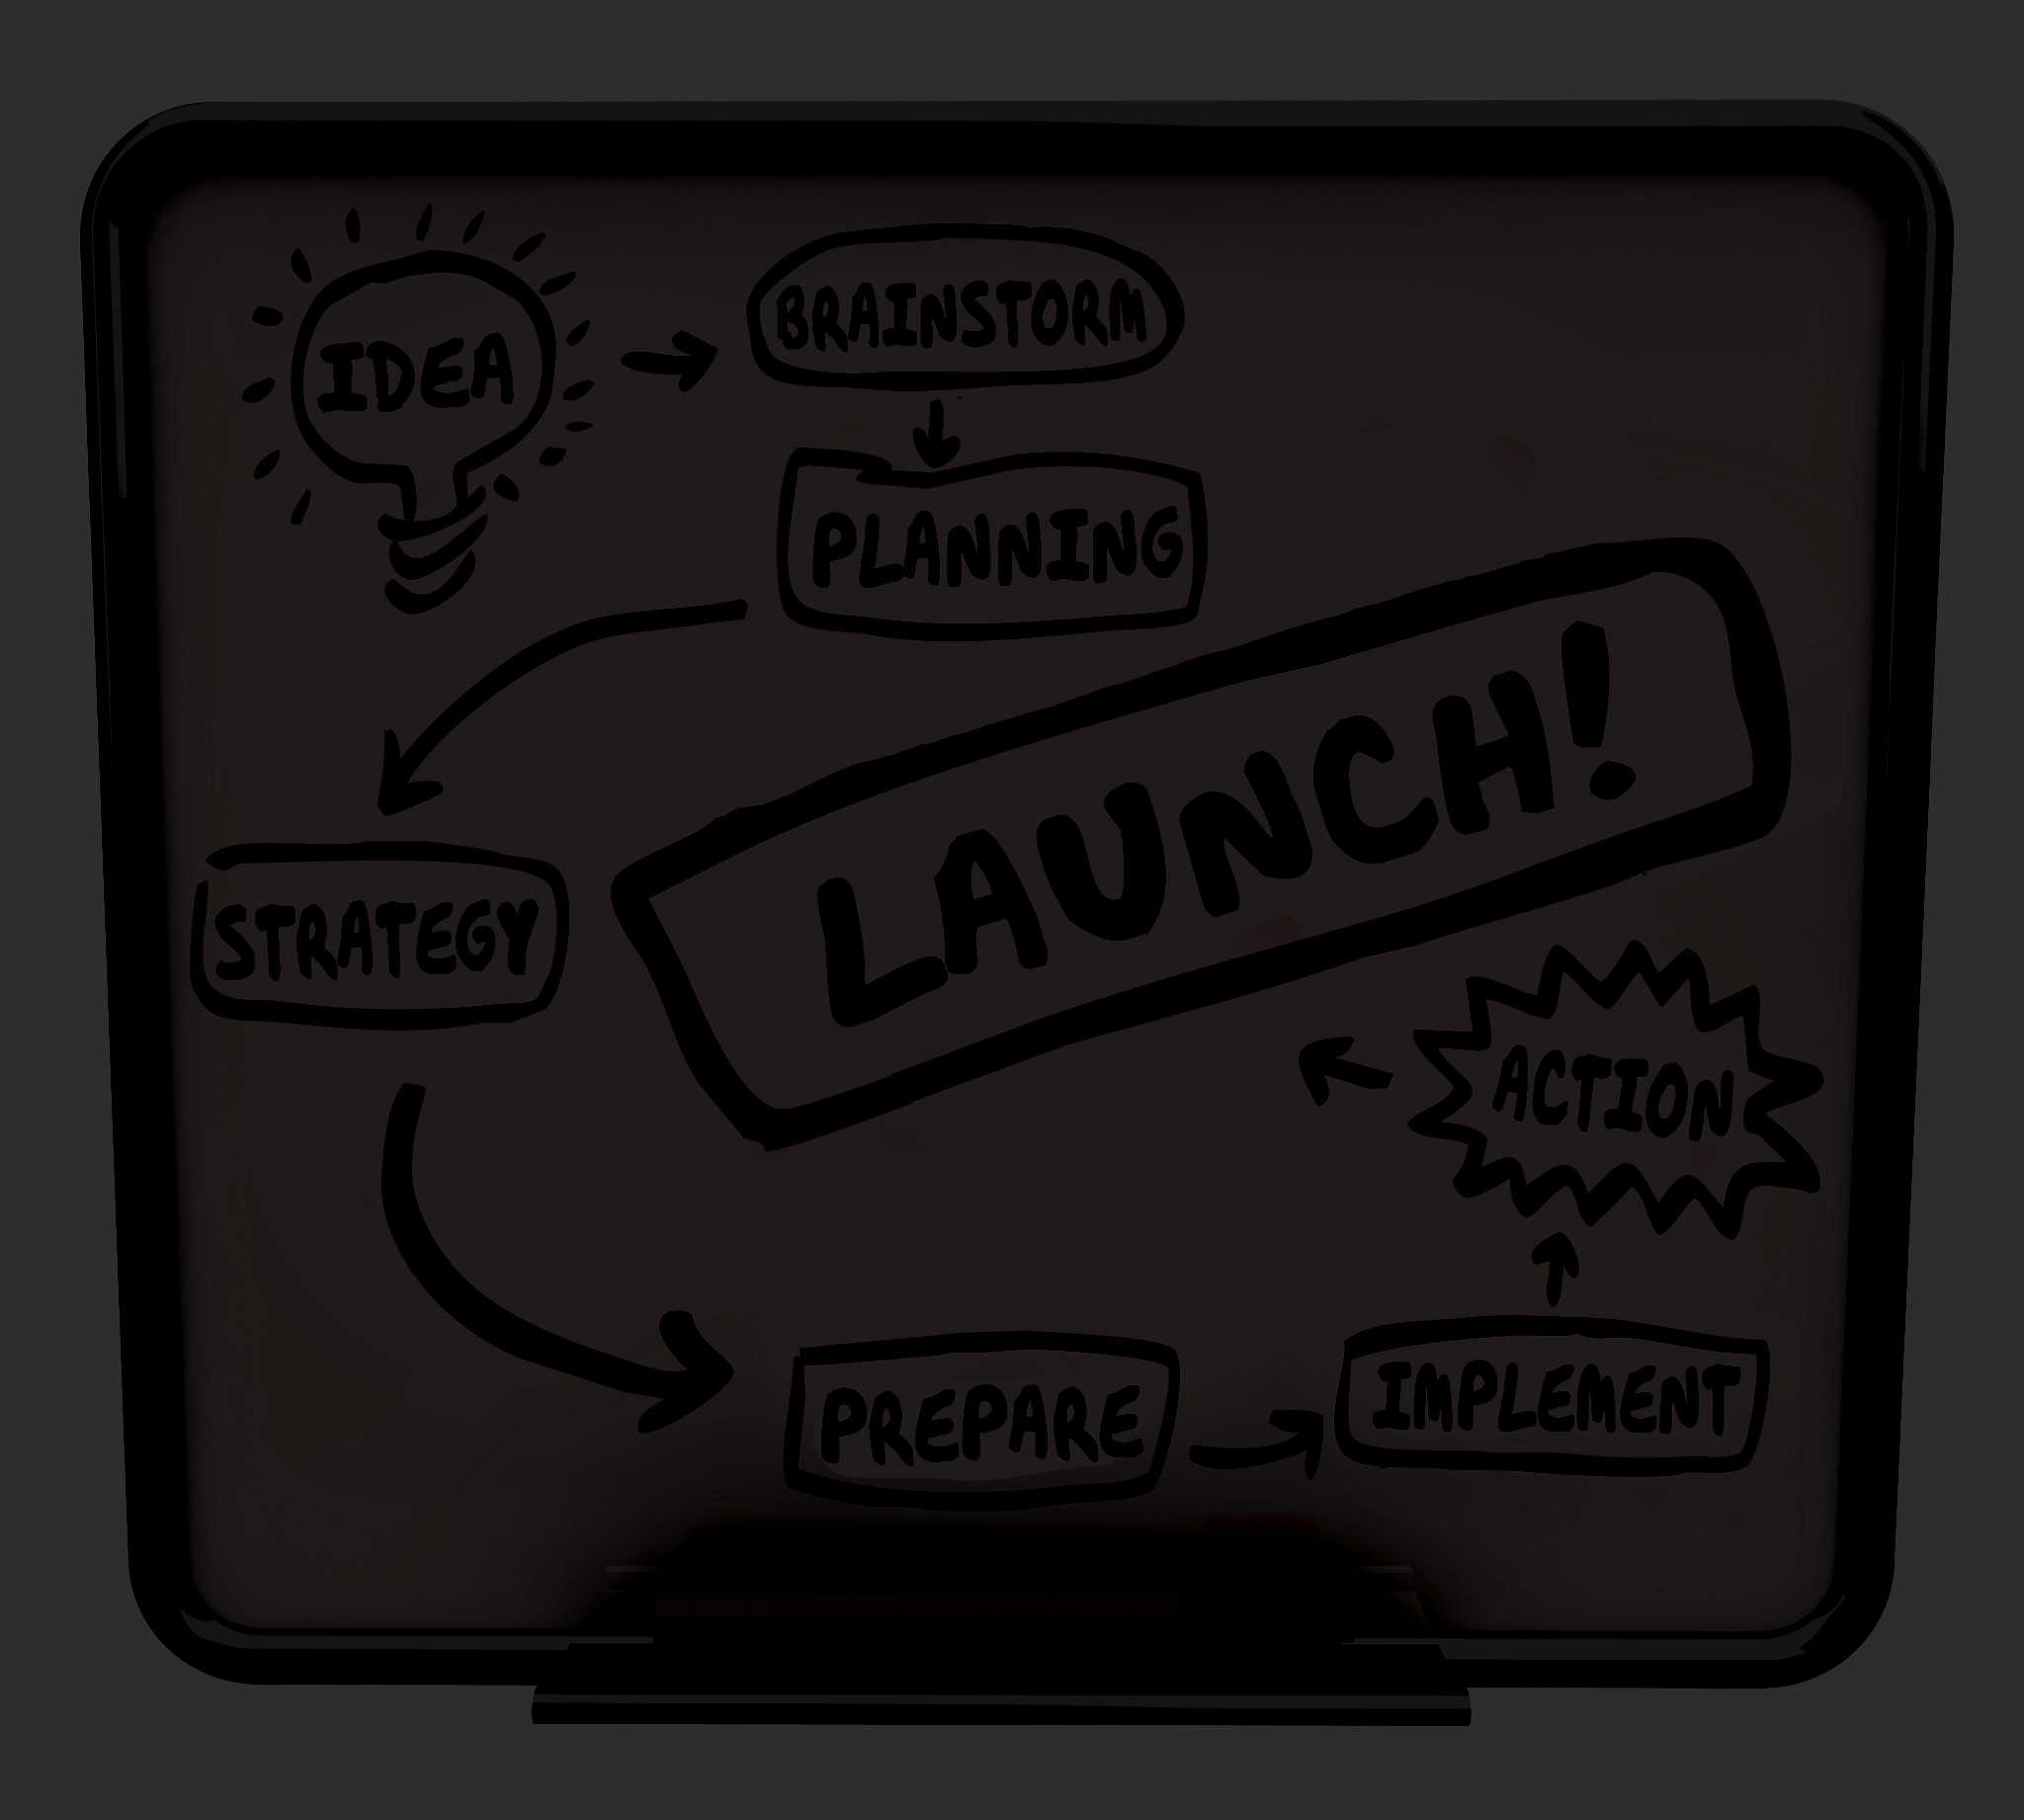 Launch word on a dry erase board with steps for a successful new business start including idea, brainstorm, plan, strategy, prepare, implement, action